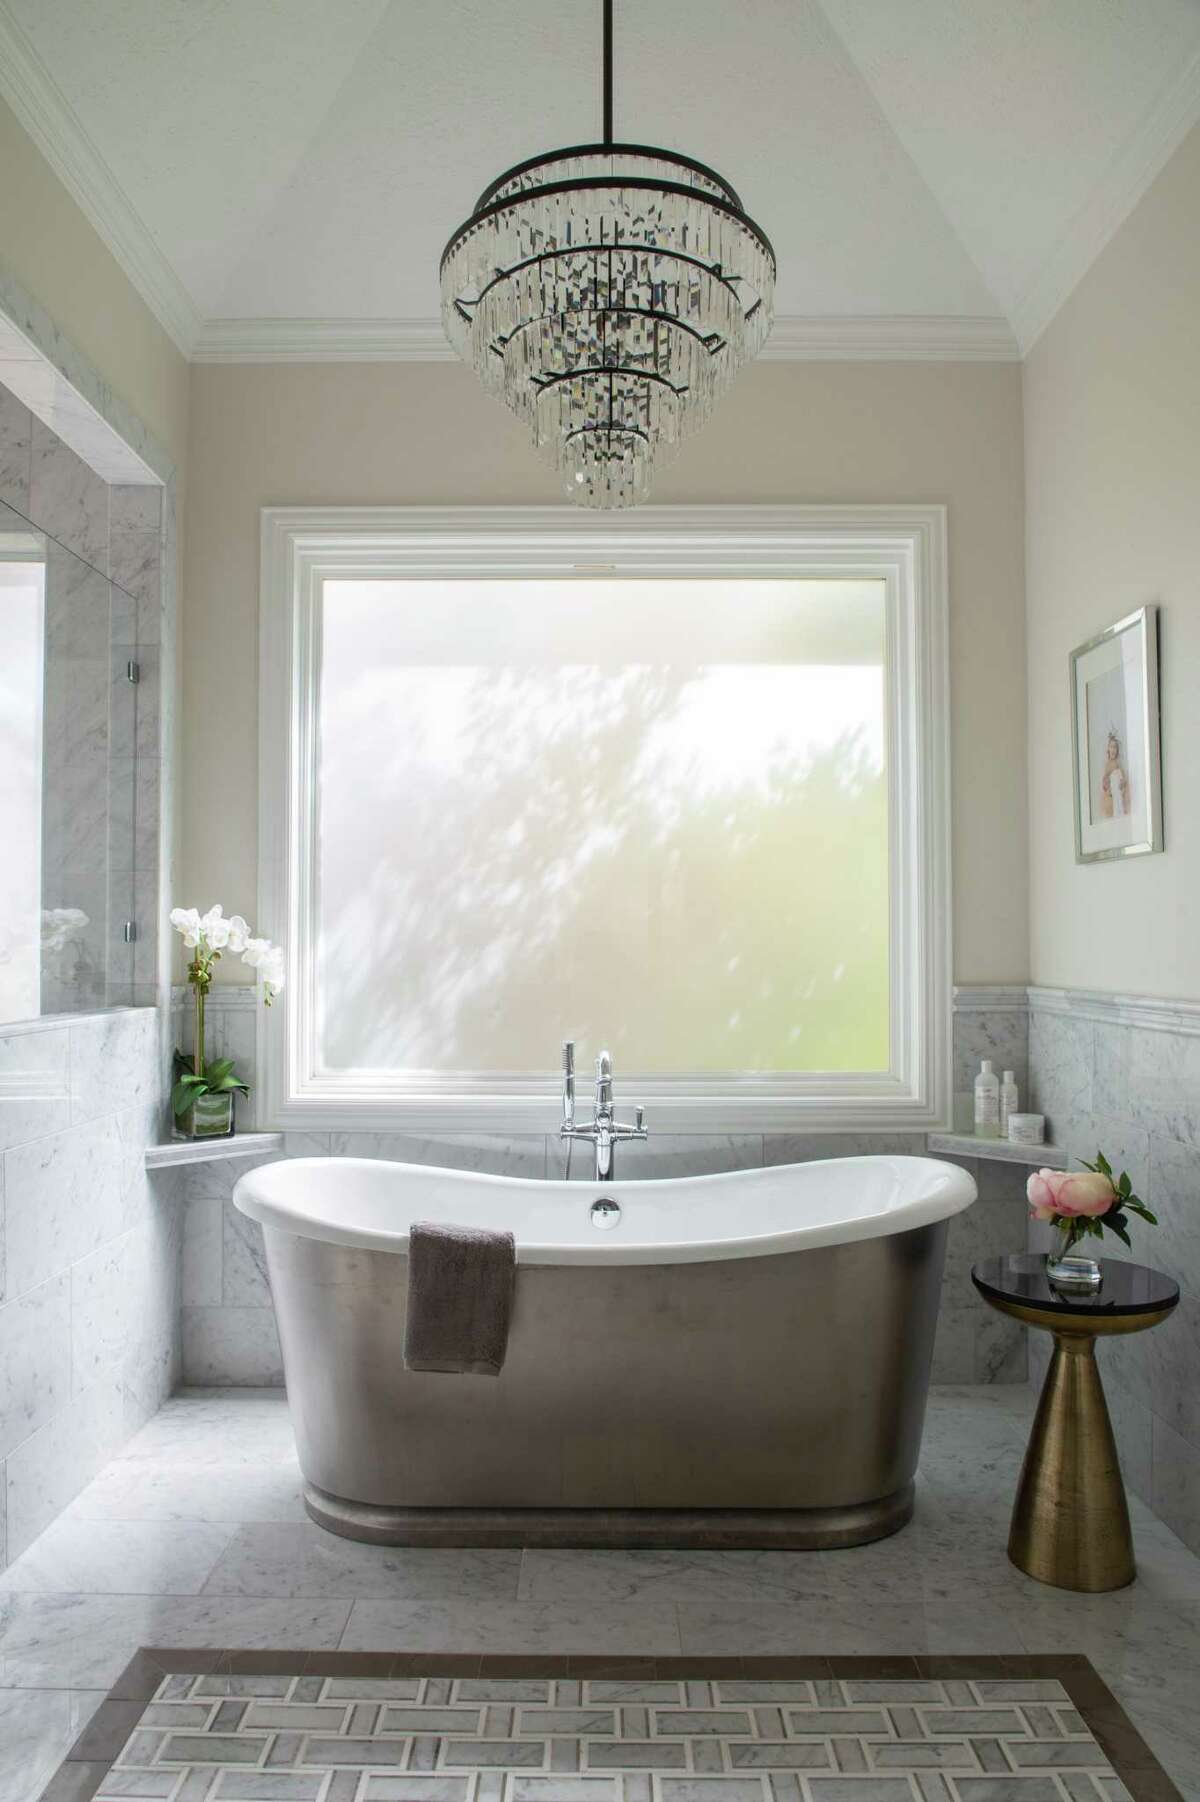 Now, the stainless-steel wrapped bathtub is a showstopper in Ellen and Miguel Mercado’s primary bathroom.